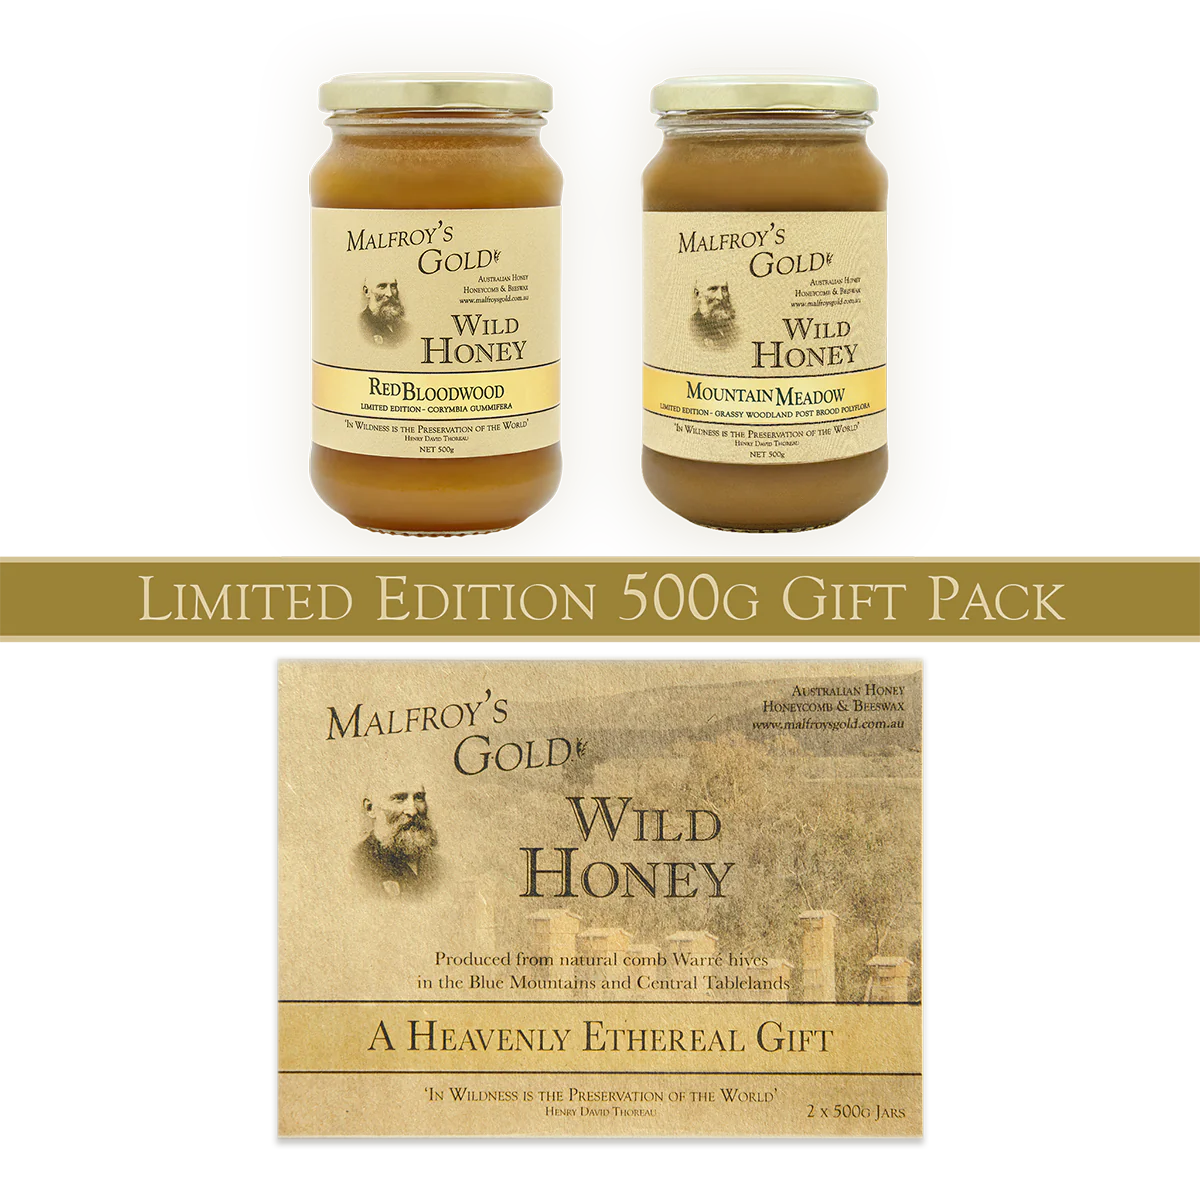 Malfroy's Gold Wild Honey 500g Mixed Two Jar Gift Pack